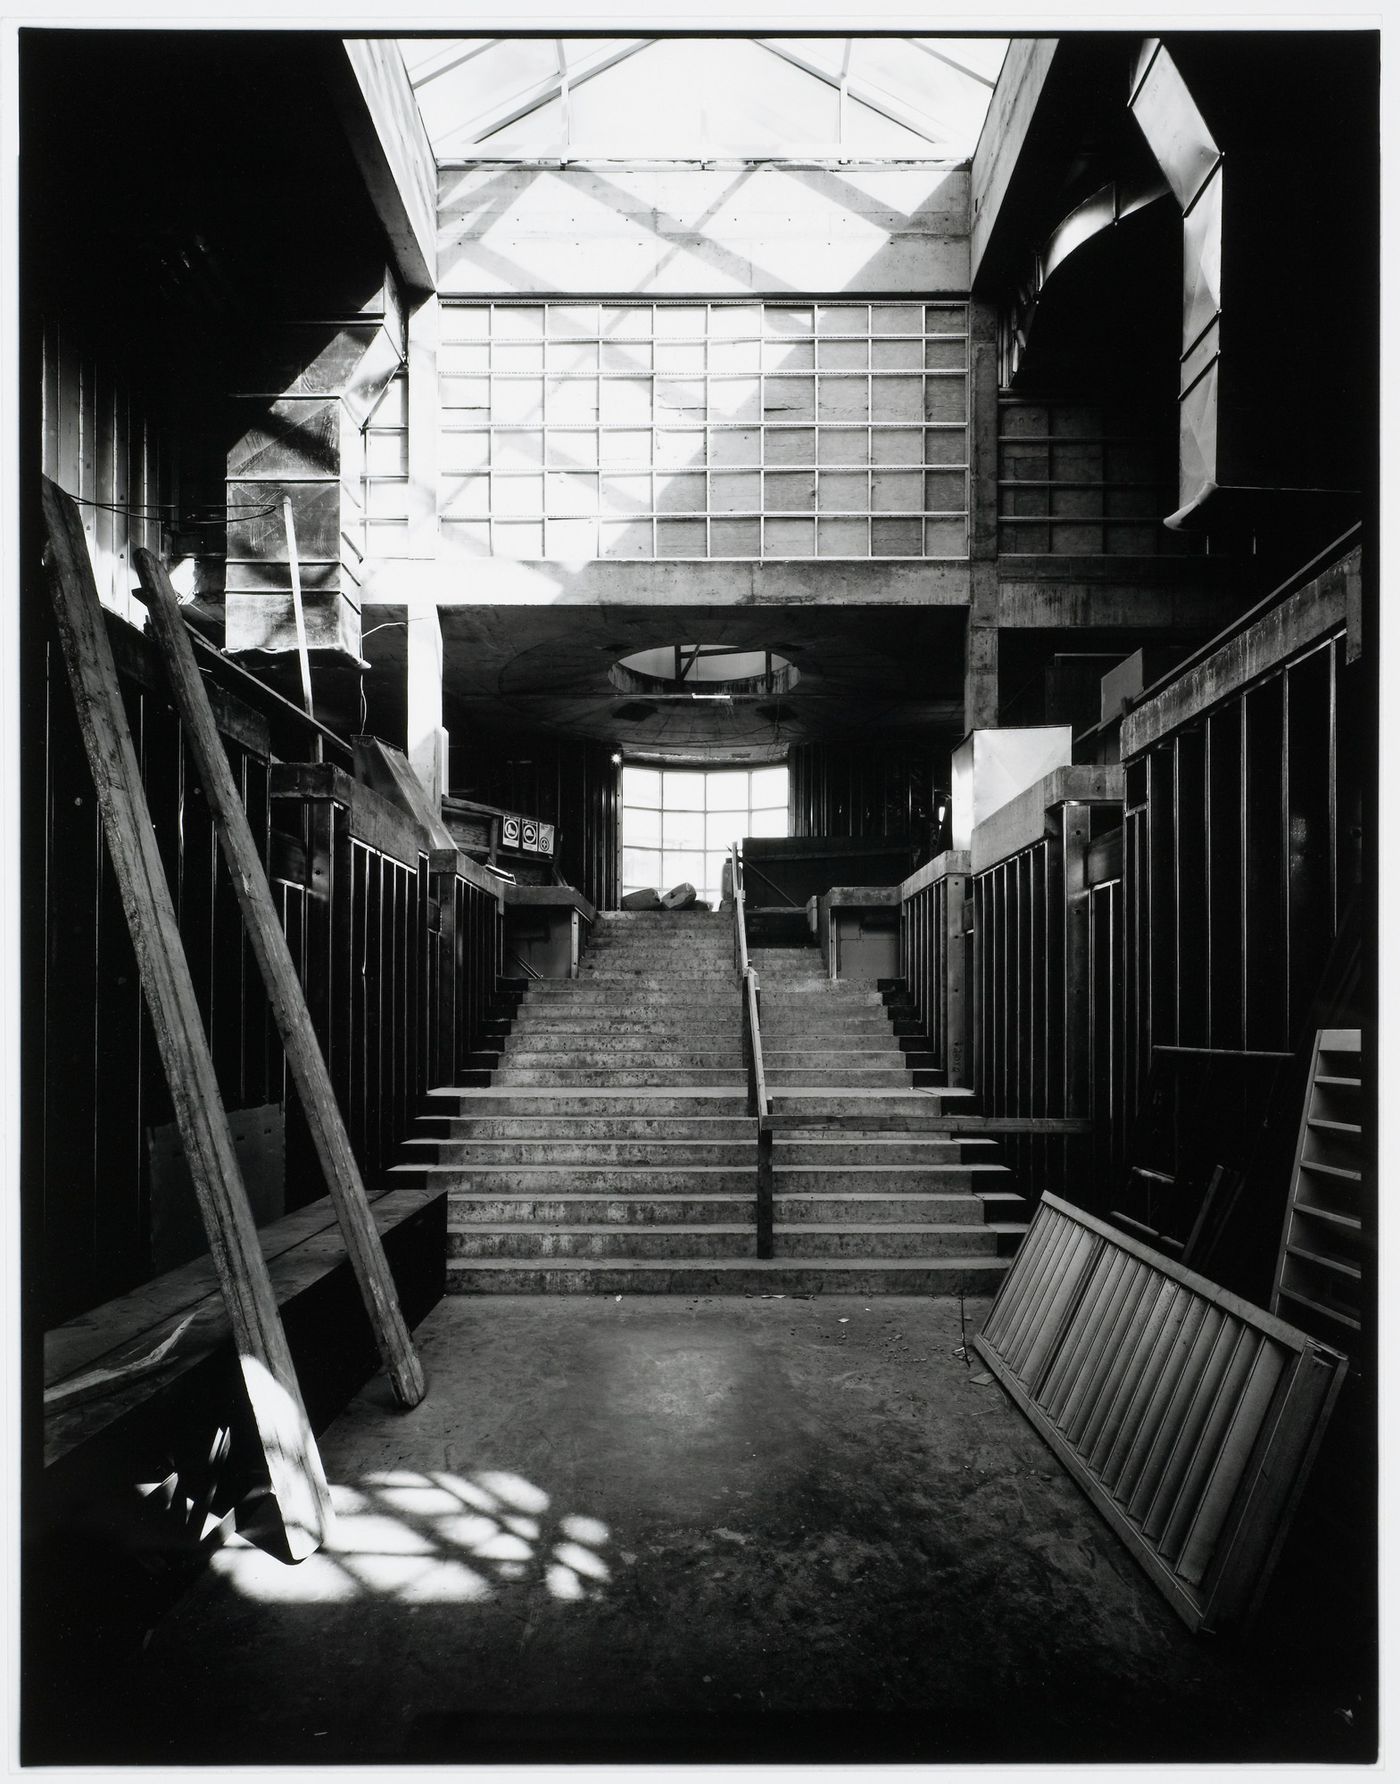 Interior view of the Entrance Court showing stairs, skylight, and building materials, Canadian Centre for Architecture under construction, Montréal, Québec, Canada